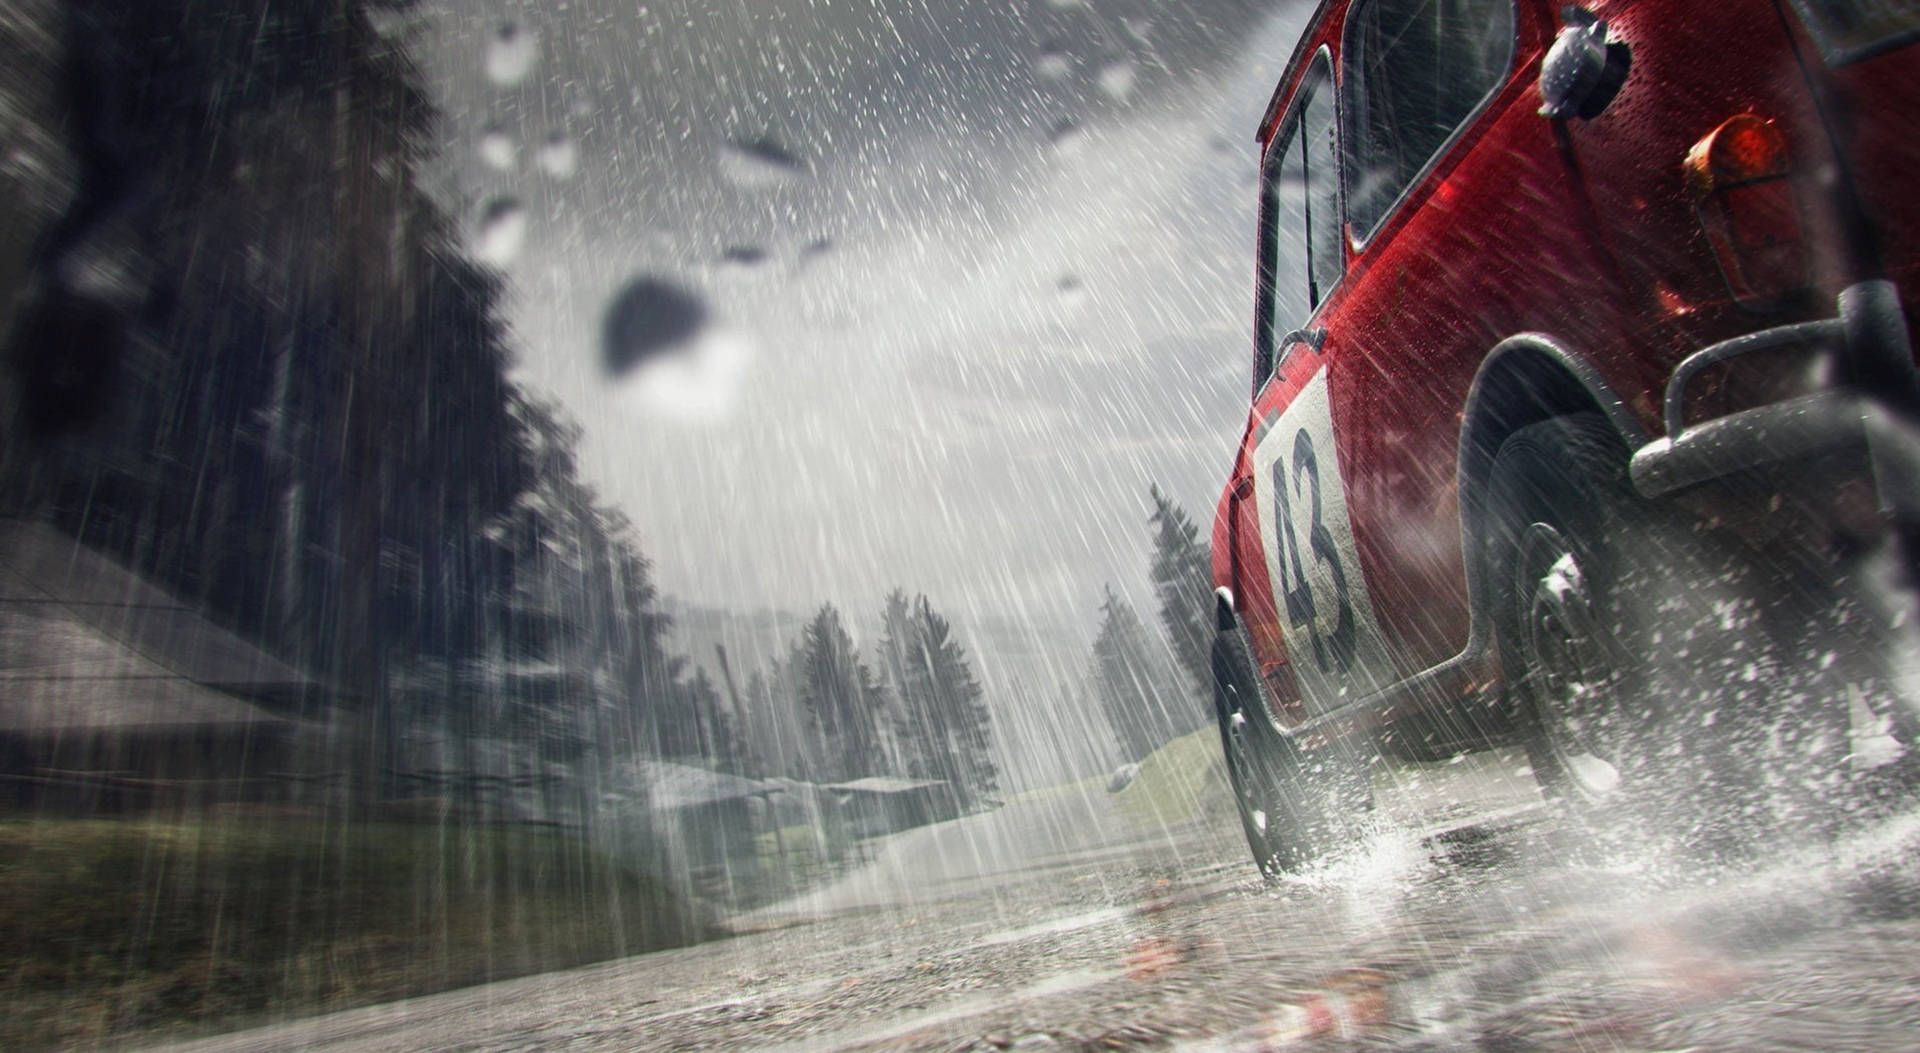 Caption: High-powered Race In Dirt 3 In The Rain Background